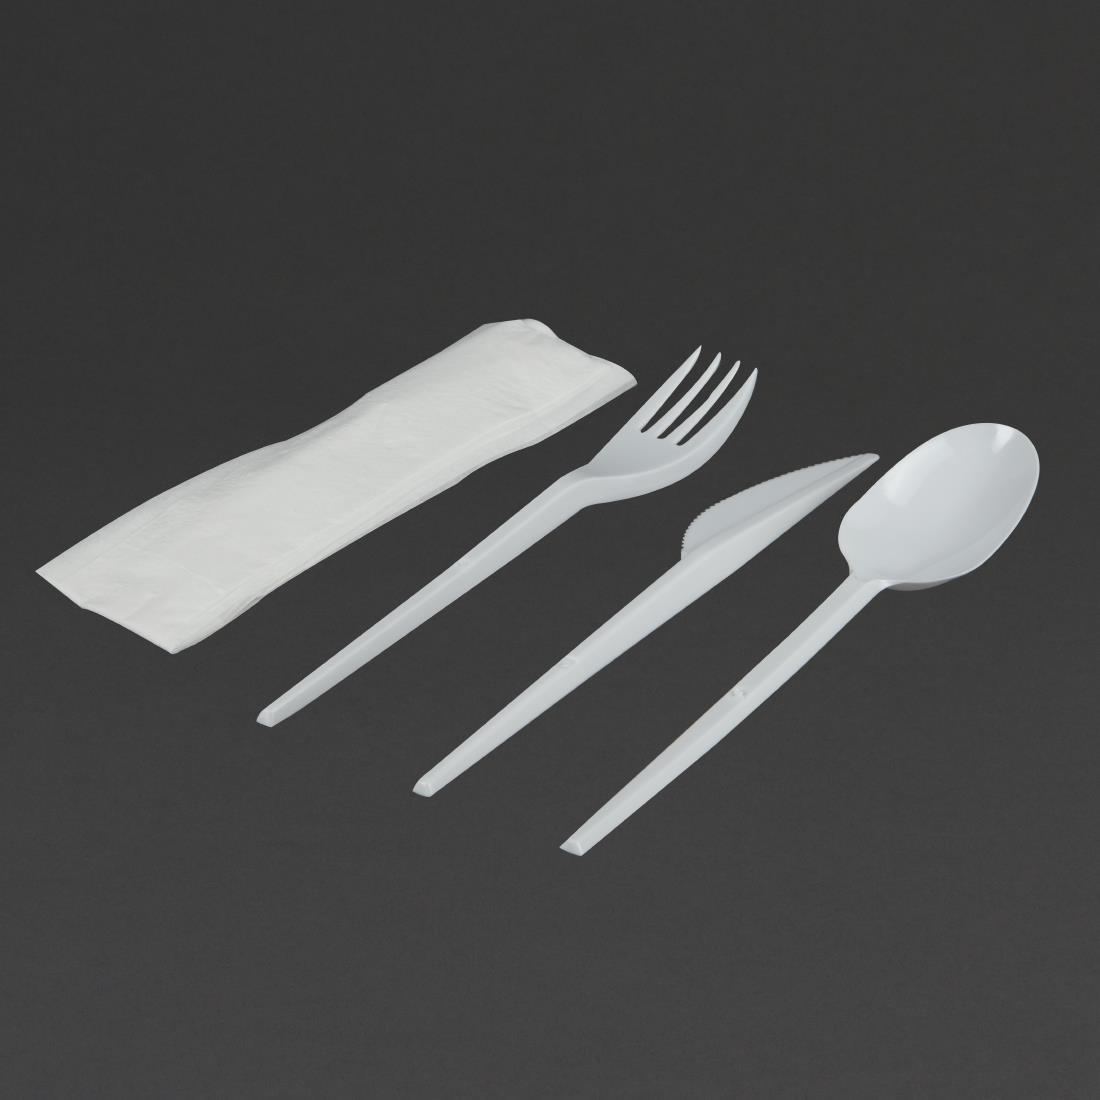 Individually Wrapped Disposable Plastic Cutlery Sets (Pack of 500) - DW799  - 1